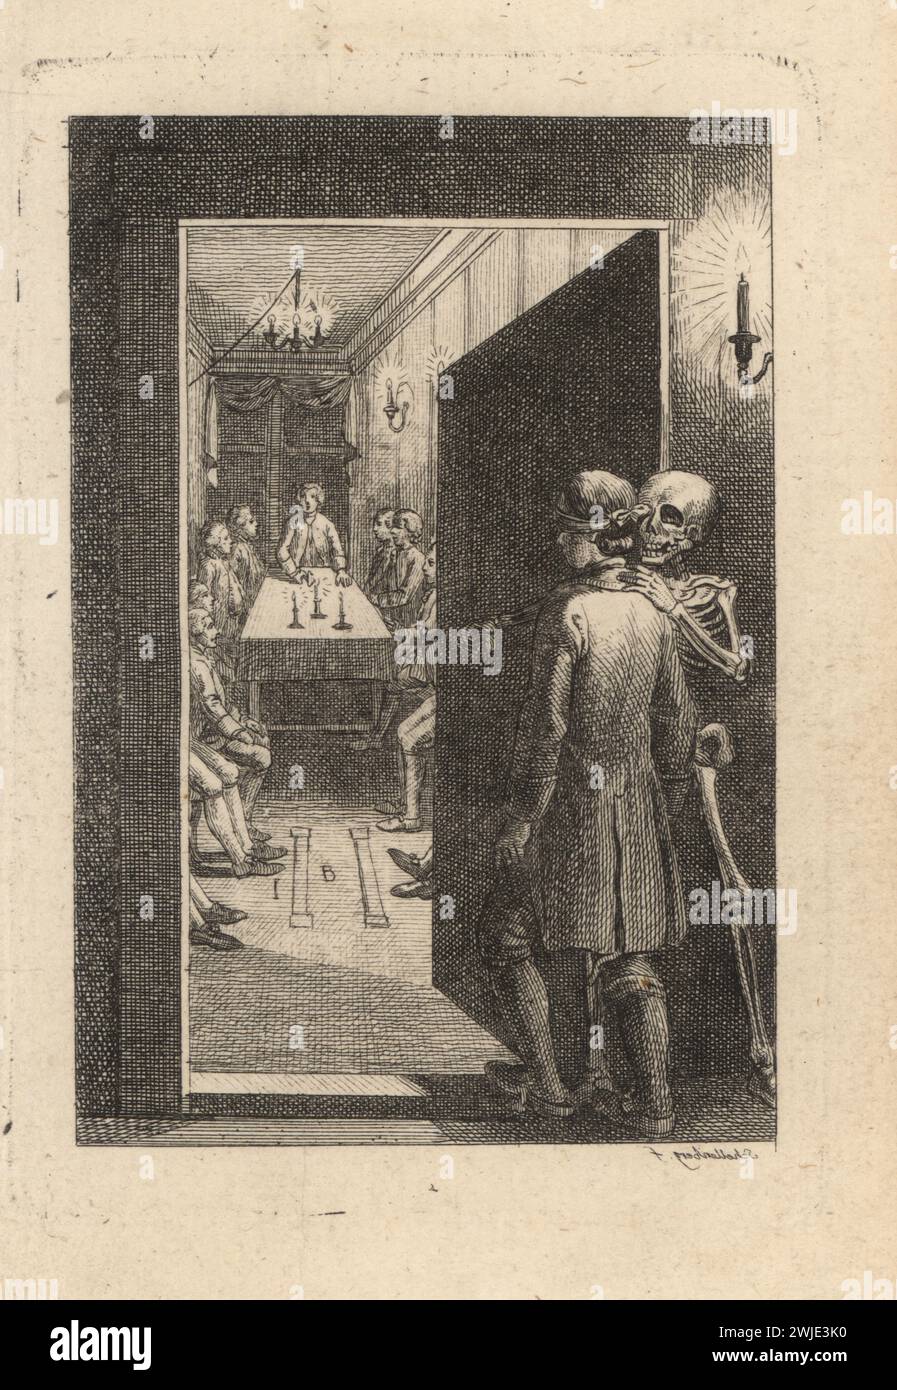 The skeleton of Death guides an initiate to a ceremony at a Masonic Lodge, 18th century. The initiate is blindfolded and enters a room with many men sitting around a table with candles. The Masonic lodge. Signature in mirror writing. Die Loge der Verschwiegenheit. Copperplate engraving by drawn and engraved by Johann Rudolf Schellenberg from Johan Karl Musaus’s Freund Heins Erscheinungen in Holbeins Manier, (Apparitions of Death in the manner of Holbein), Heinrich Steiner, Winterthur, 1785. Stock Photo